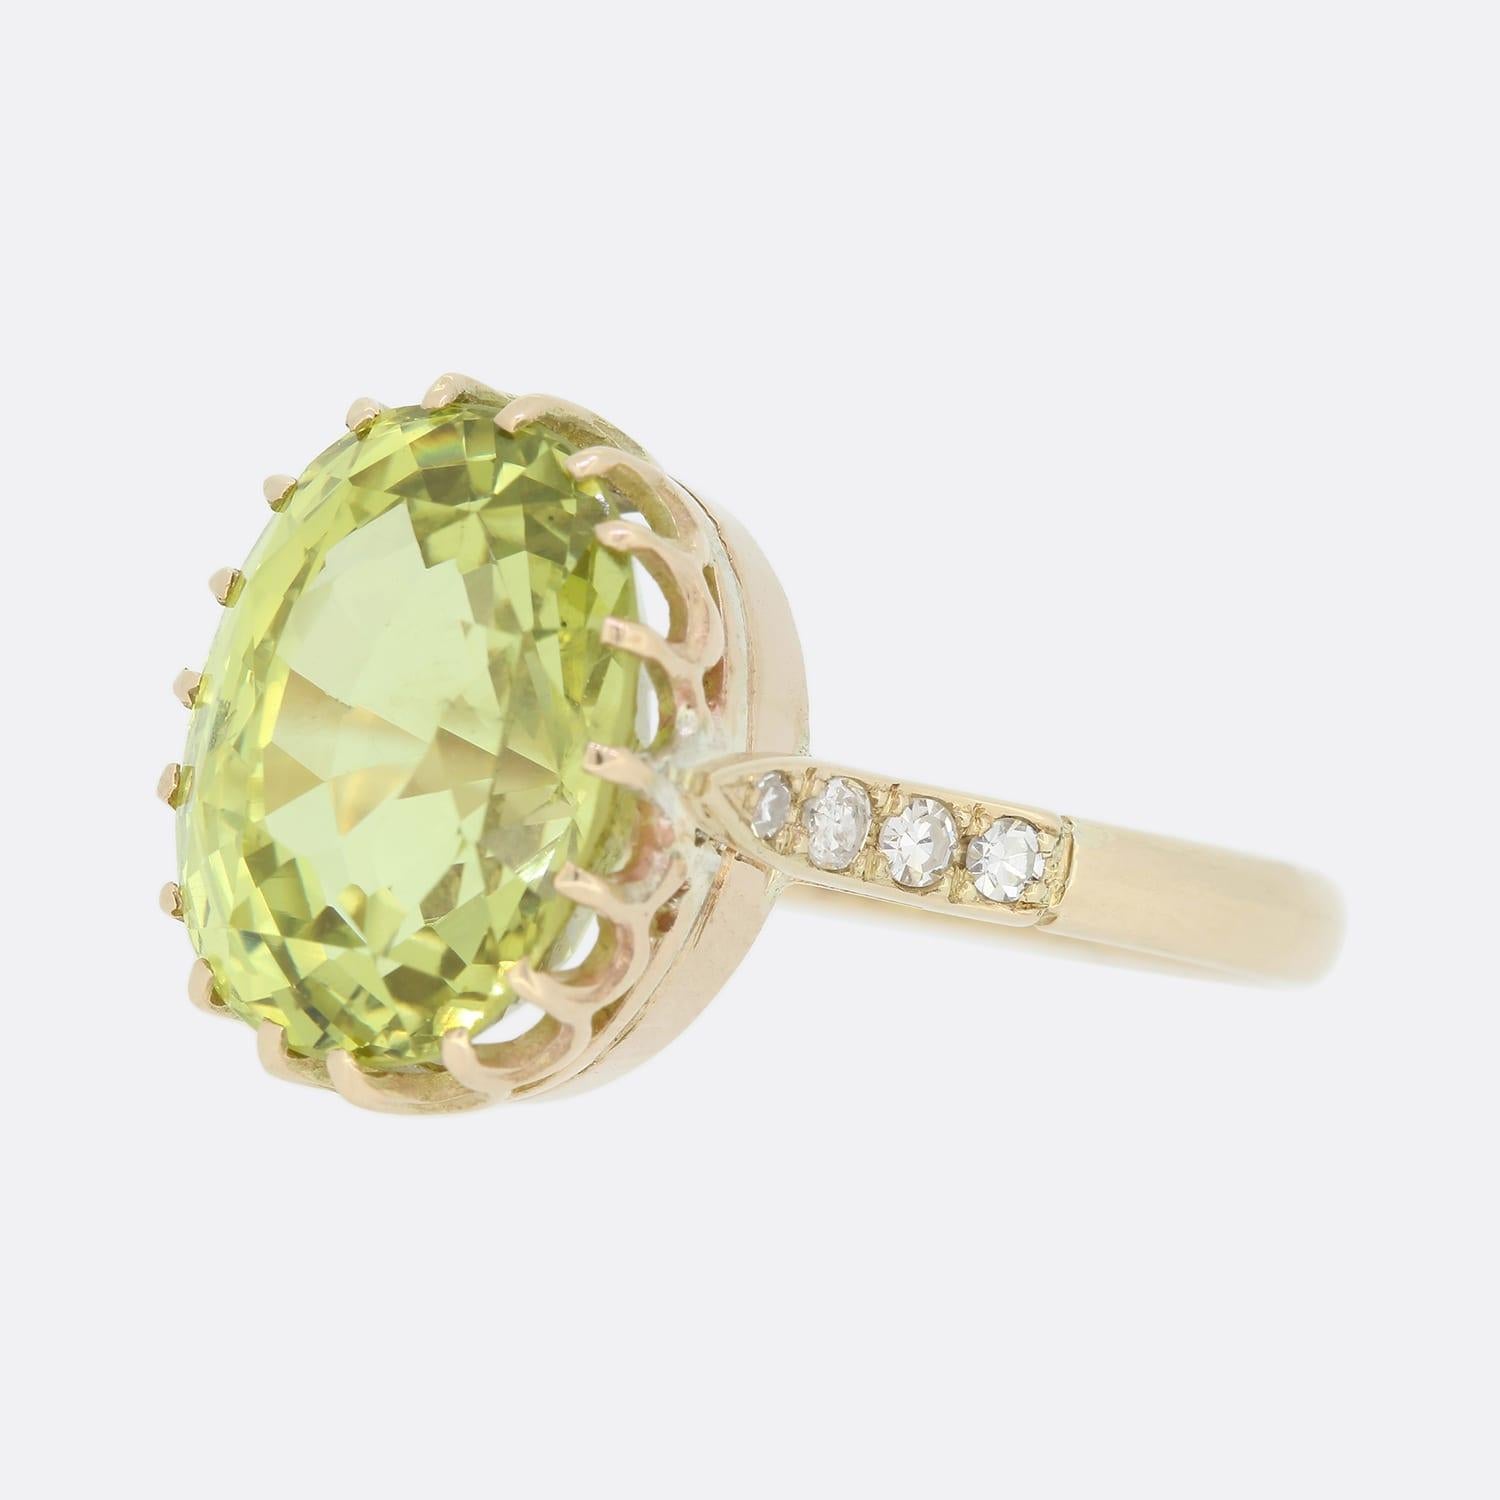 This is a vintage yellow chrysoberyl solitaire ring. The centre stone is an oval cushion cut, a greenish yellow tone and set in a raised 18 claw mount. On each shoulder there are a further 4 'eight' cut diamonds.

Condition: Used (Very Good)
Weight: